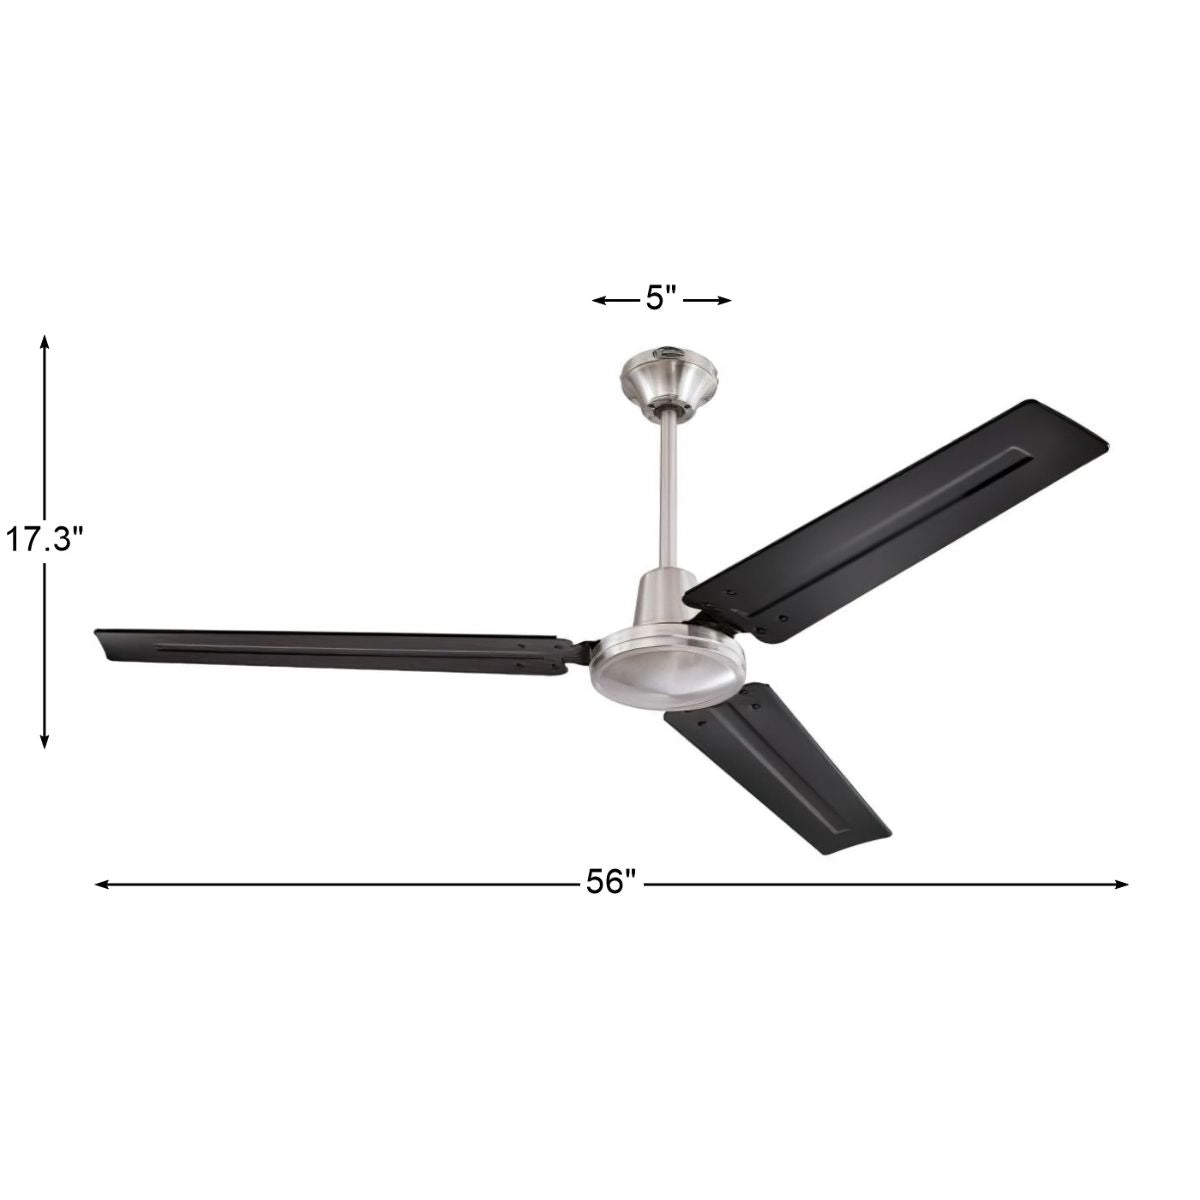 Jax 56 Inch Industrial Ceiling Fan With Wall Control, Brushed Nickel Finish with Black Steel Blades